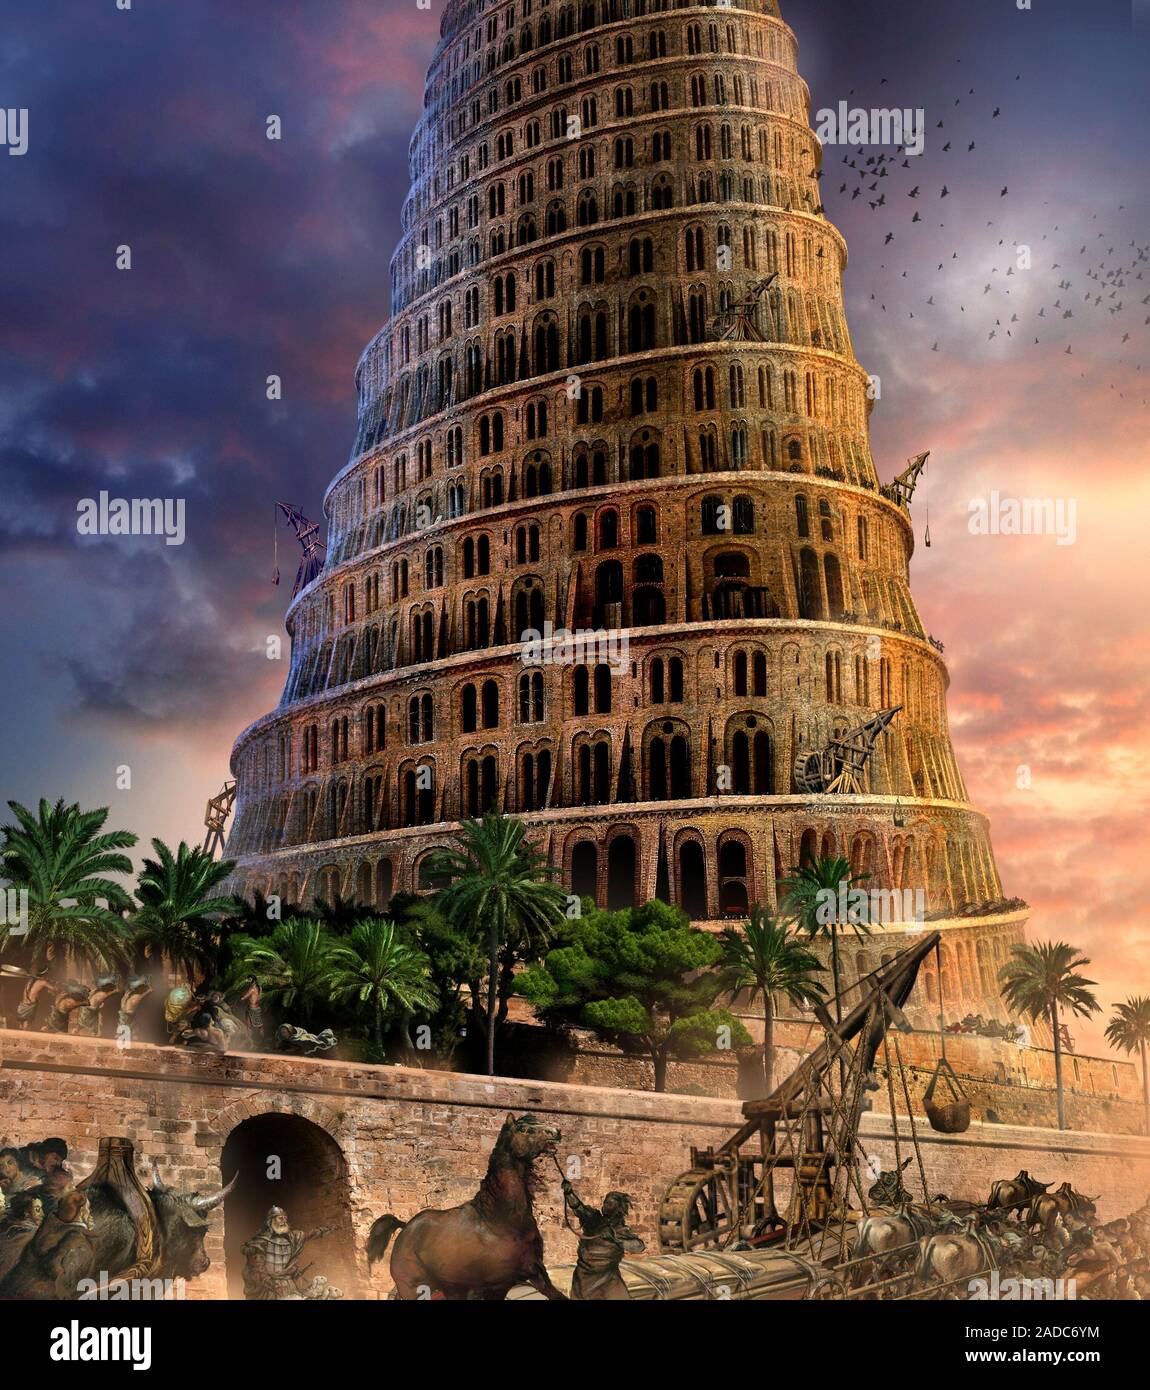 Tower Of Babel Illustration The Story Of The Tower Of Babel Is Told